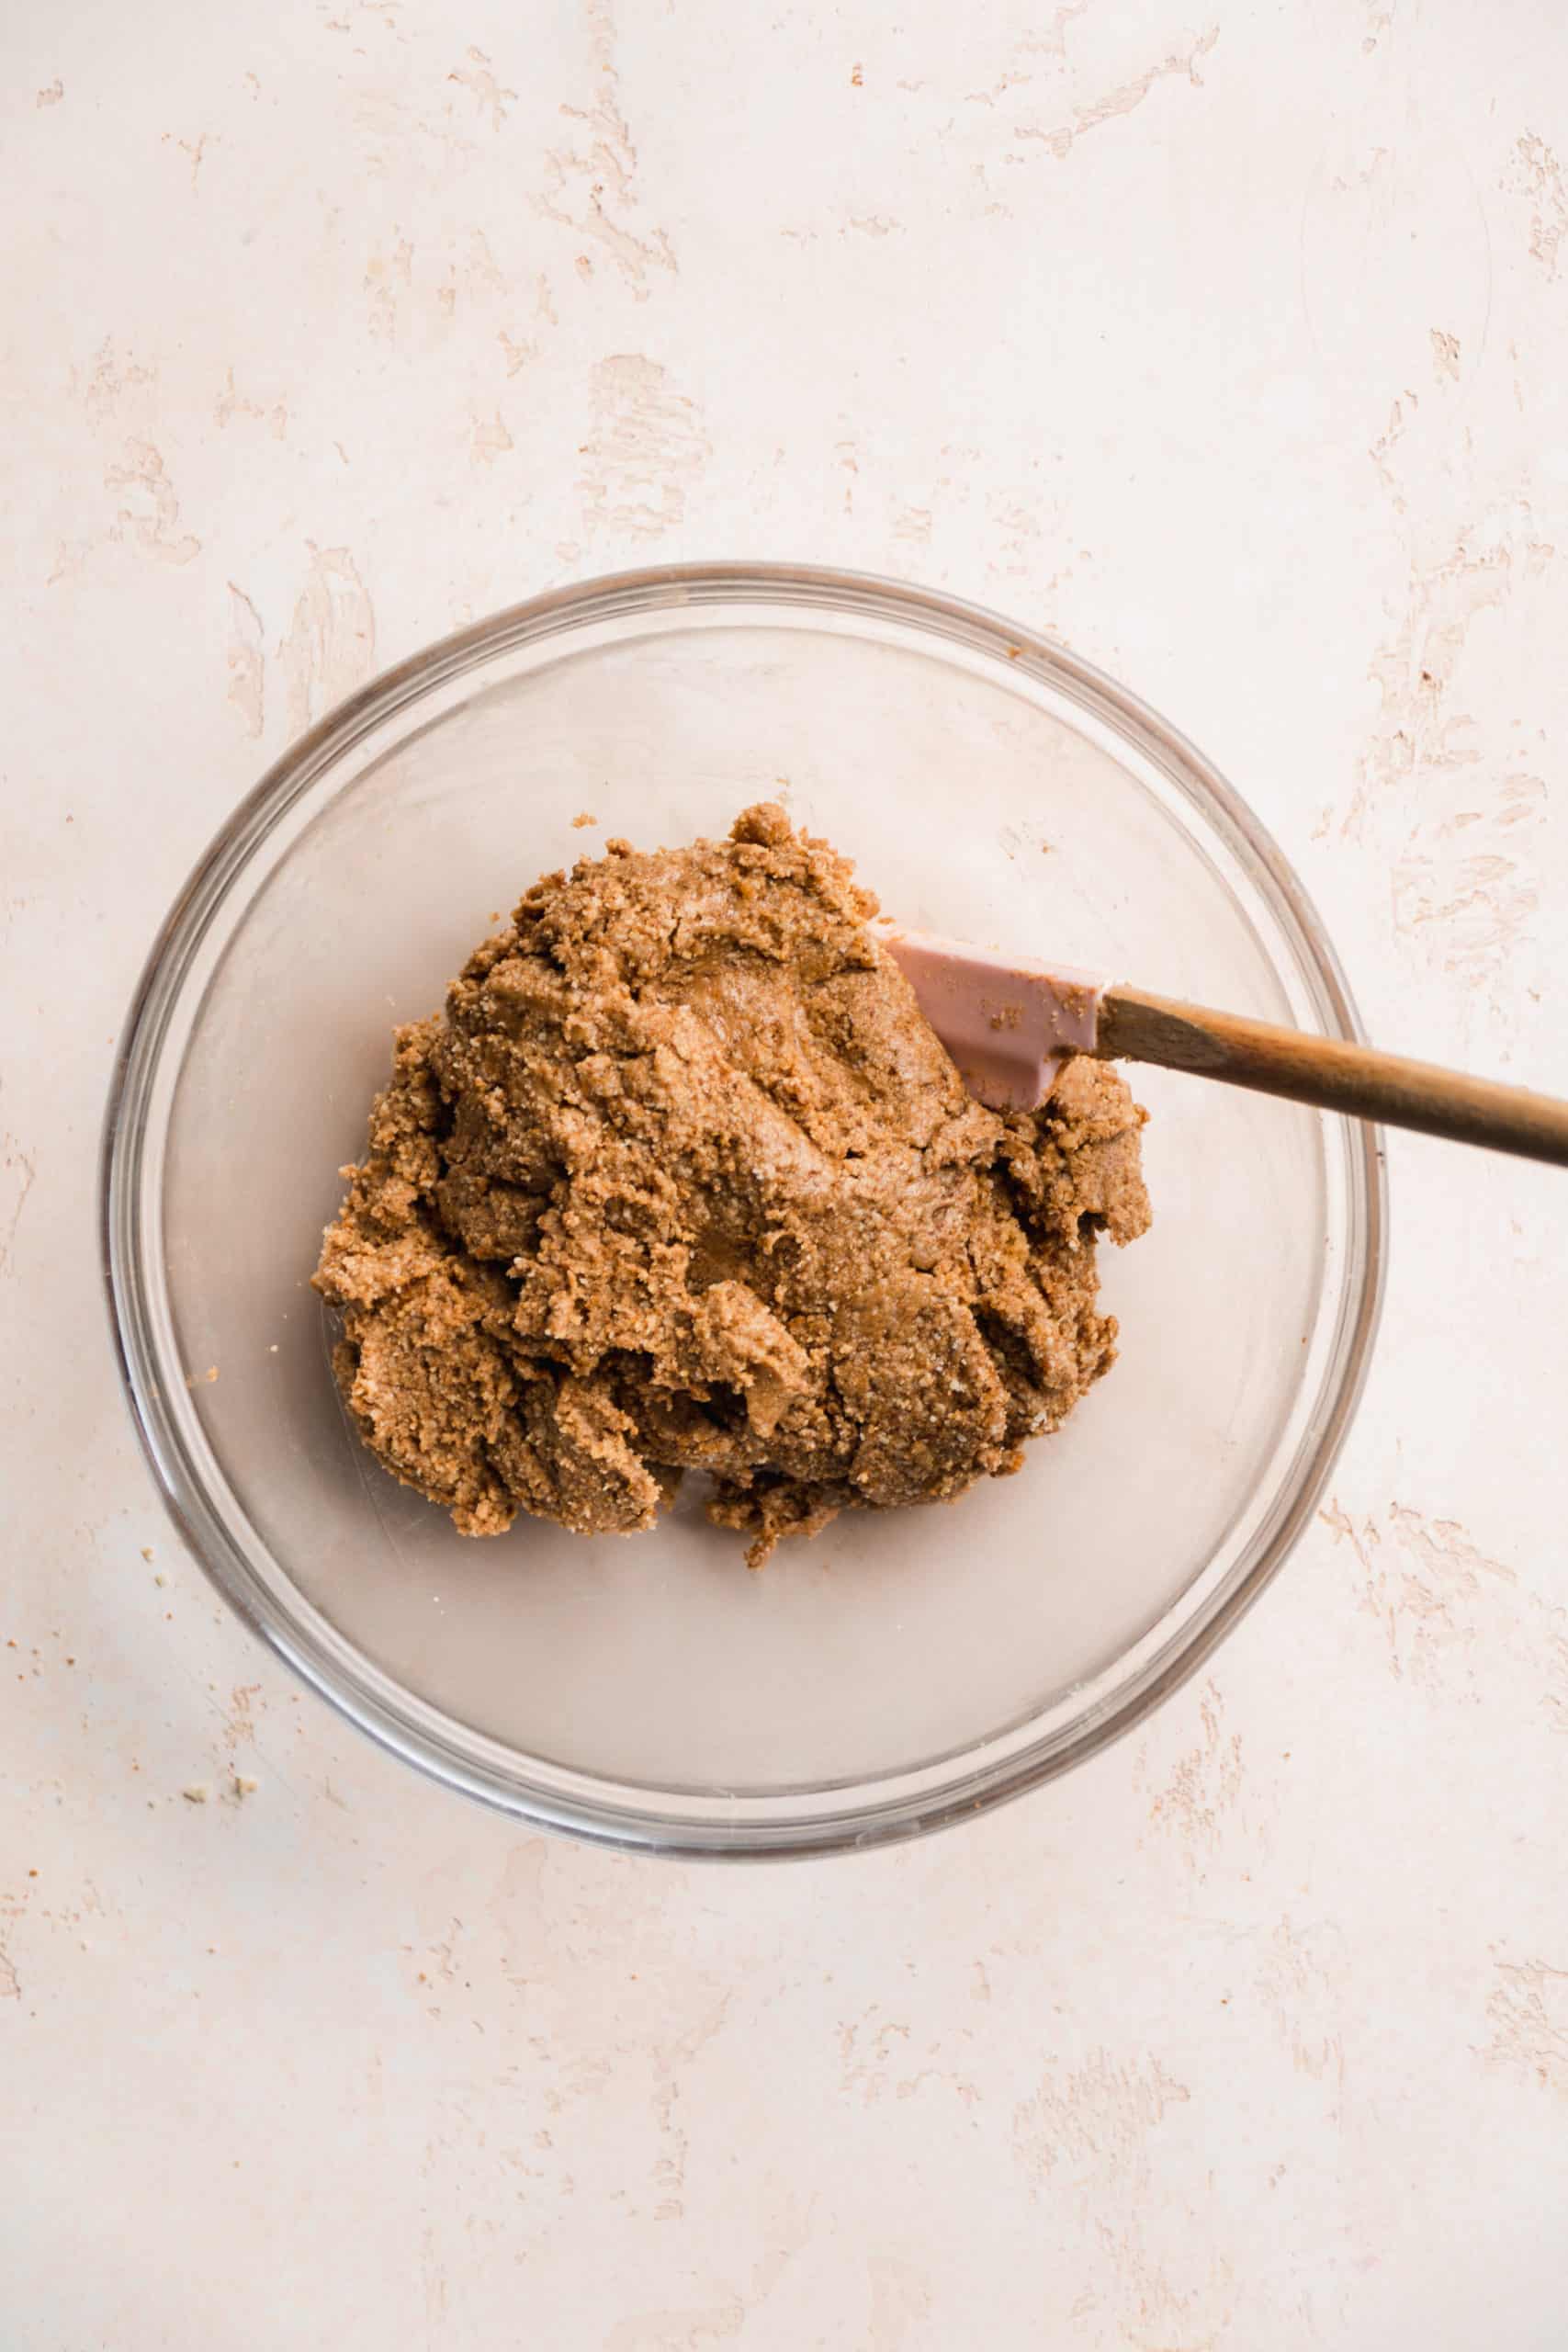 Peanut butter mixture in a glass bowl with a spatula.